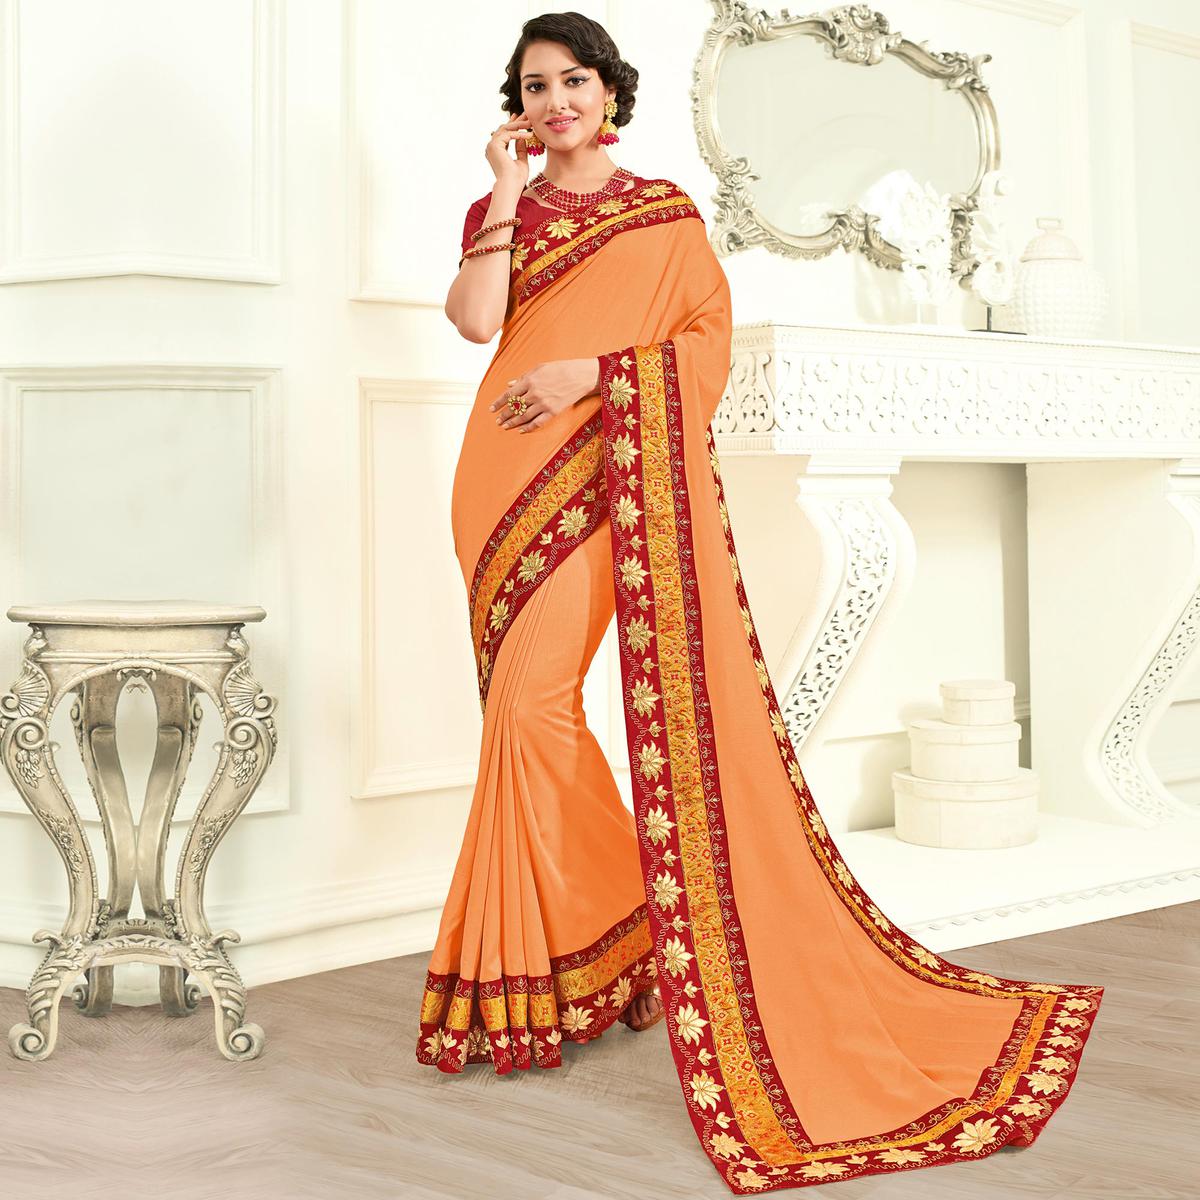 You are currently viewing How to wear Chiffon Sarees?